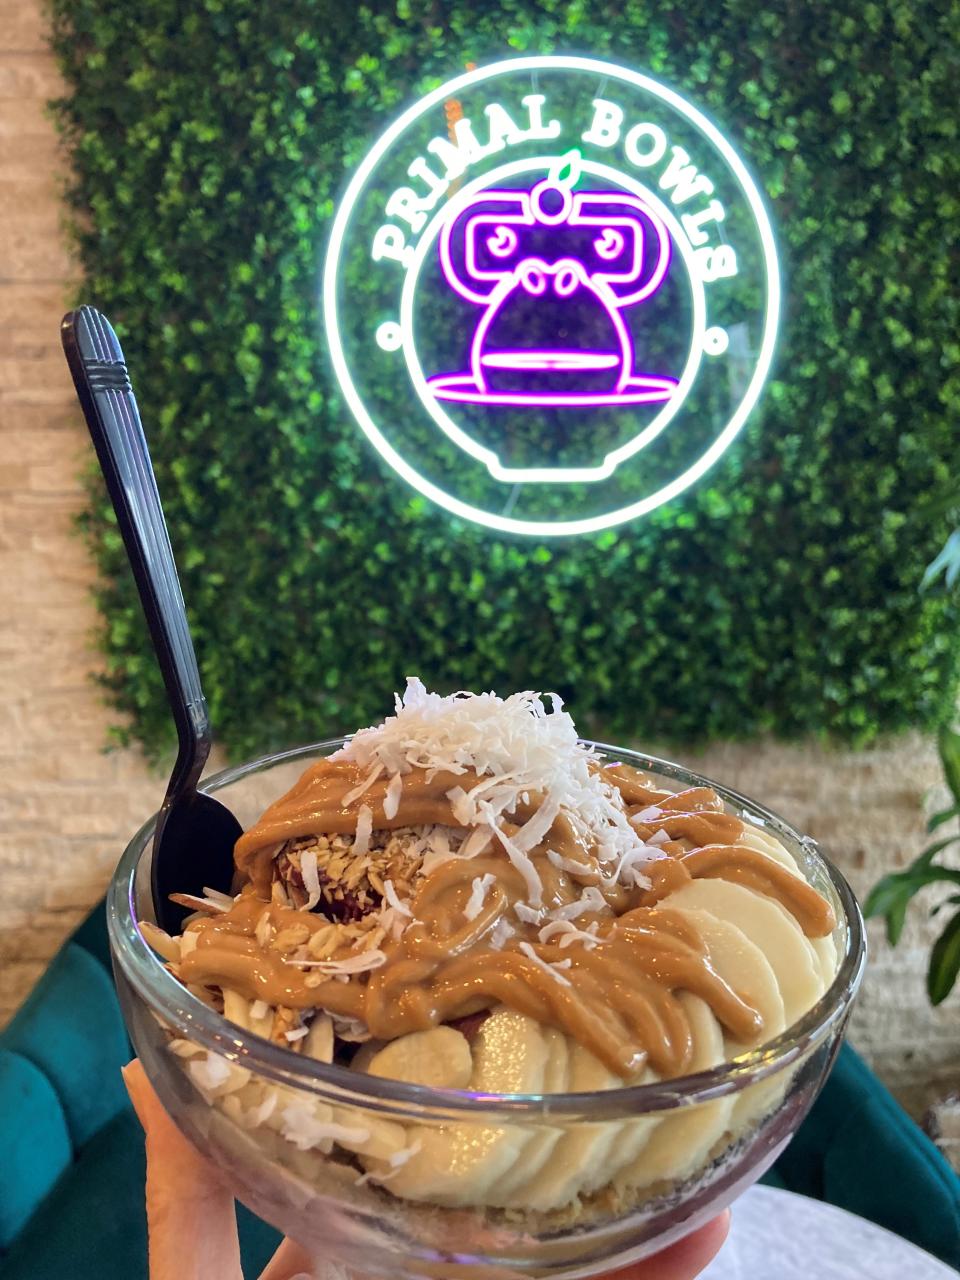 The "Funky Monkey" acai bowl at Primal Bowls in Yorktown Heights, made with banana, peanut butter, granola and coconut flakes. Photographed Nov. 29, 2021.